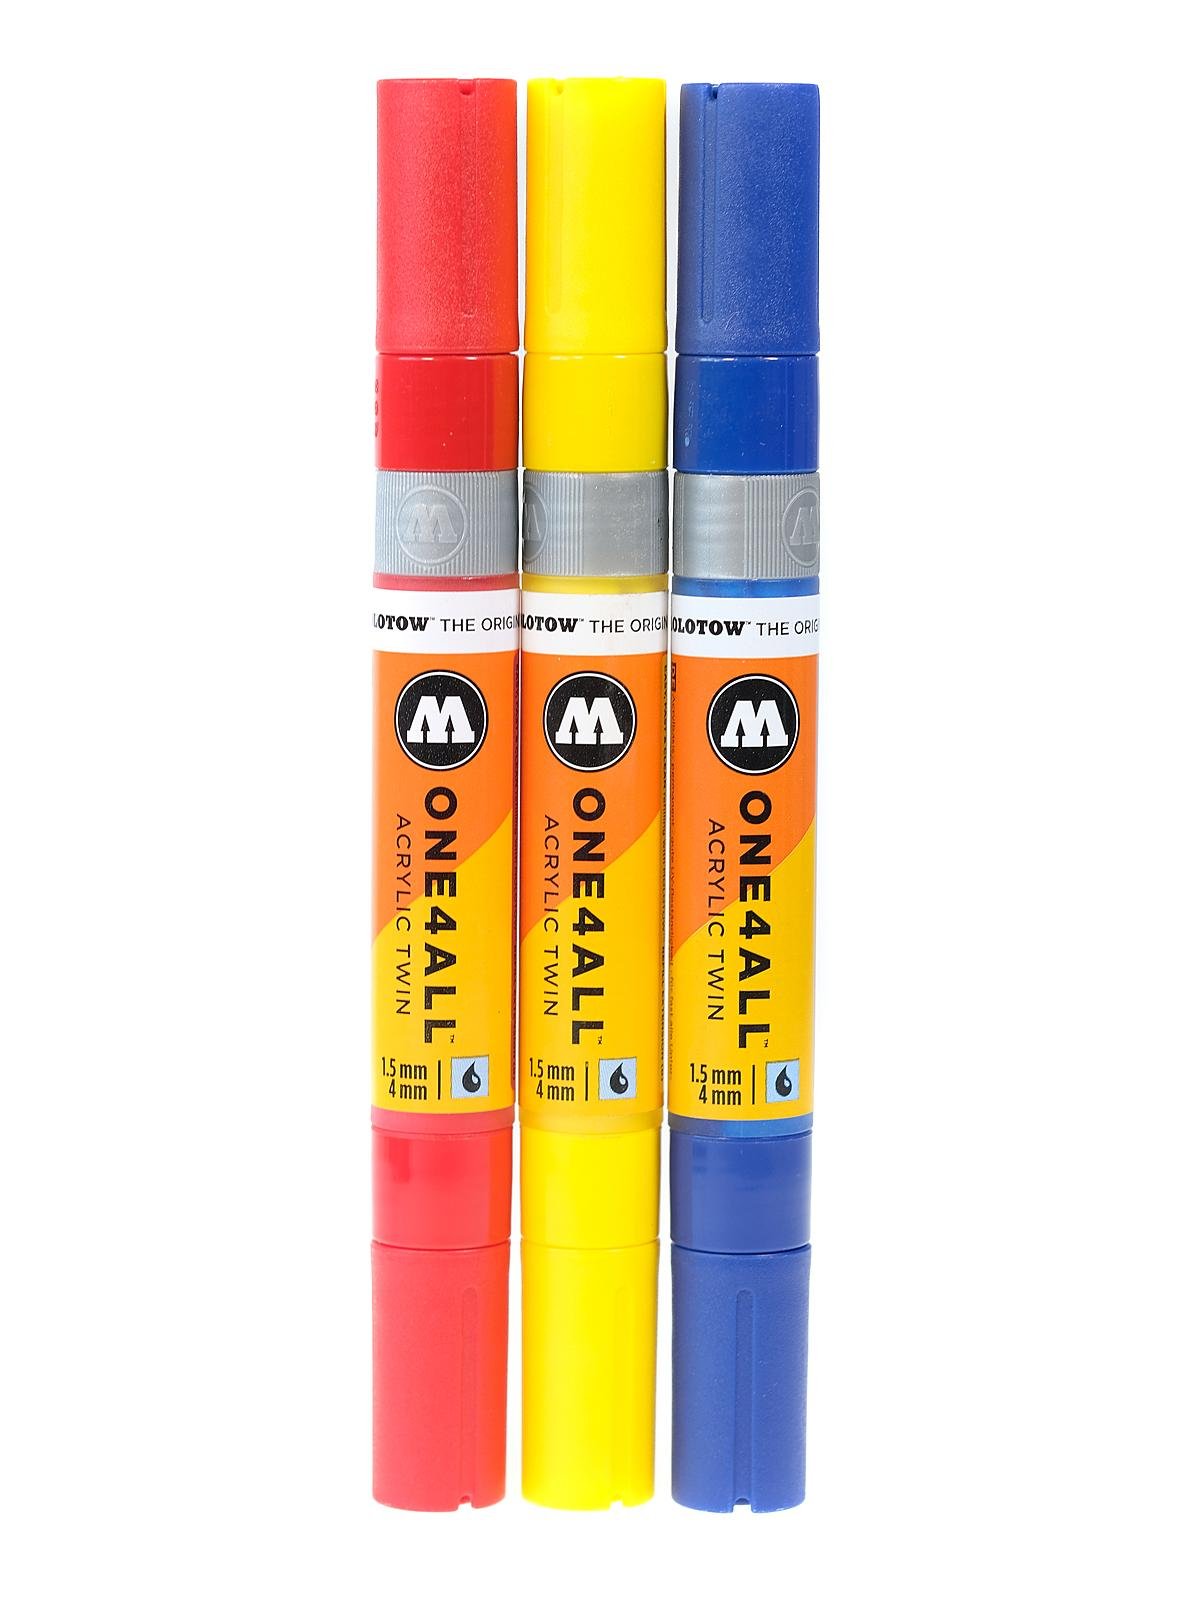 Molotow One4All Marker 4mm Set of 6 Neon Colors